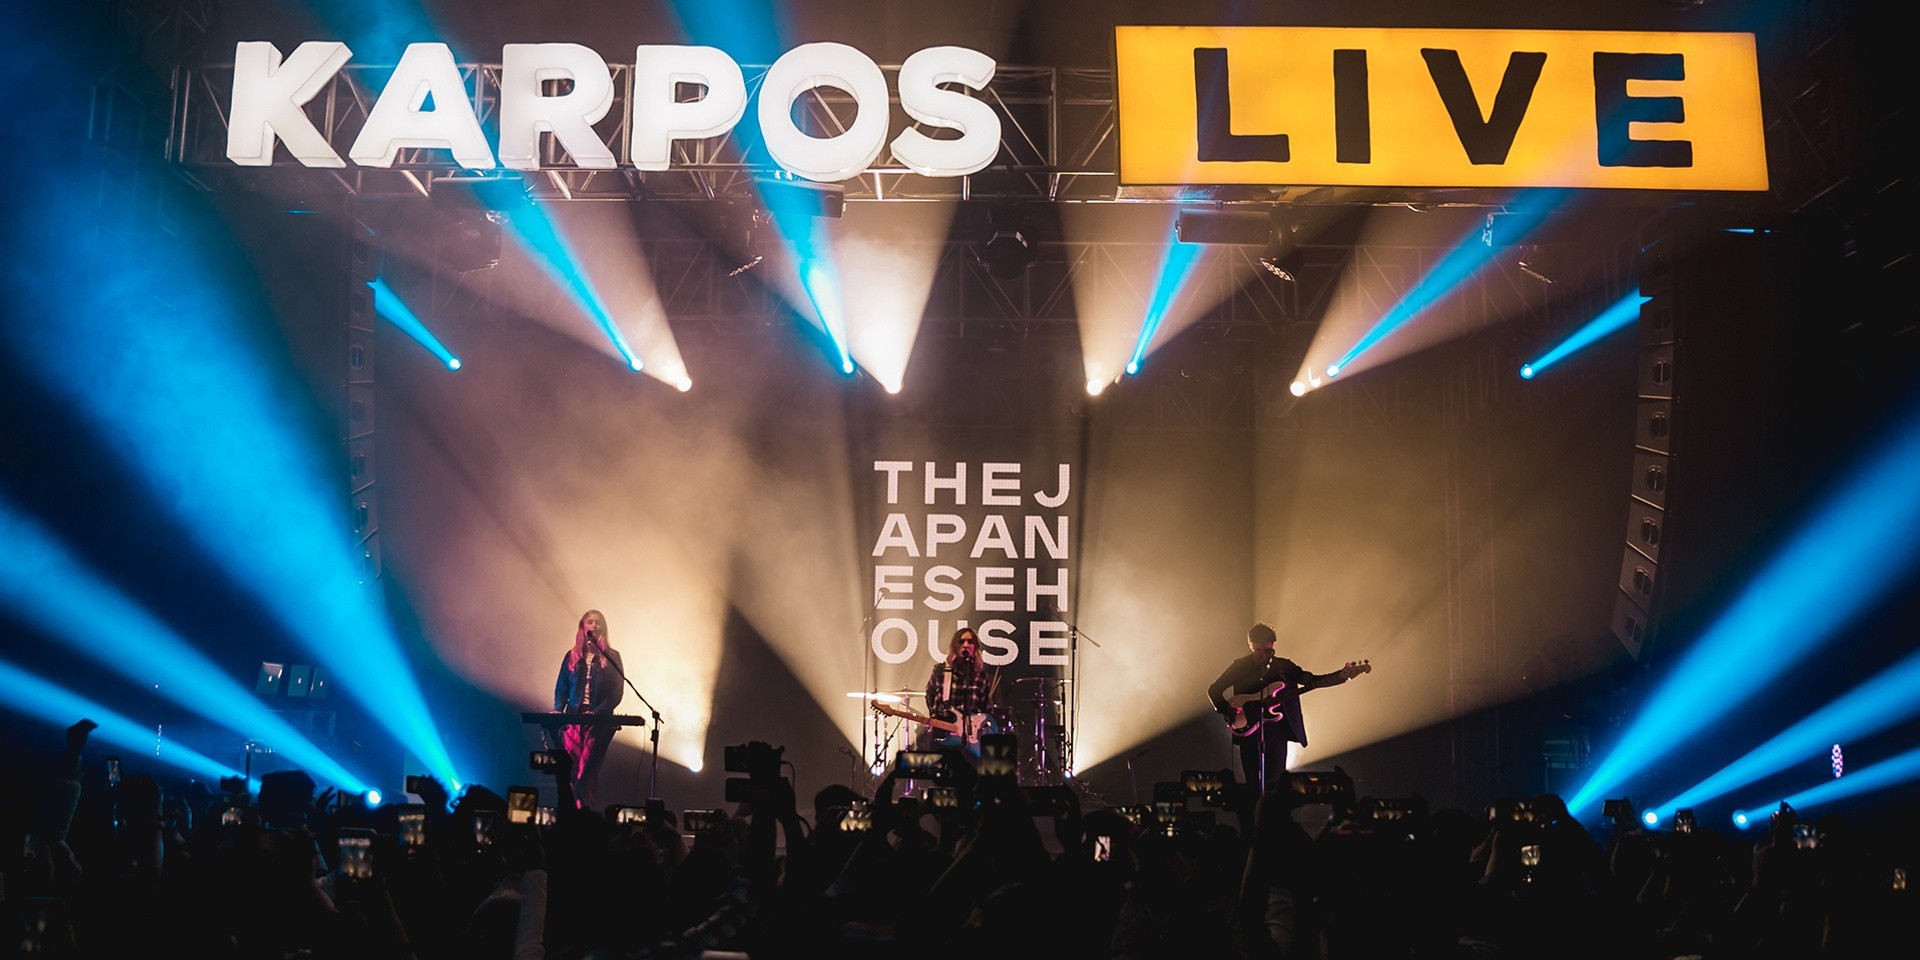 Munimuni and The Japanese House deliver breathtaking performances at Karpos Live Mix 7 – photo gallery